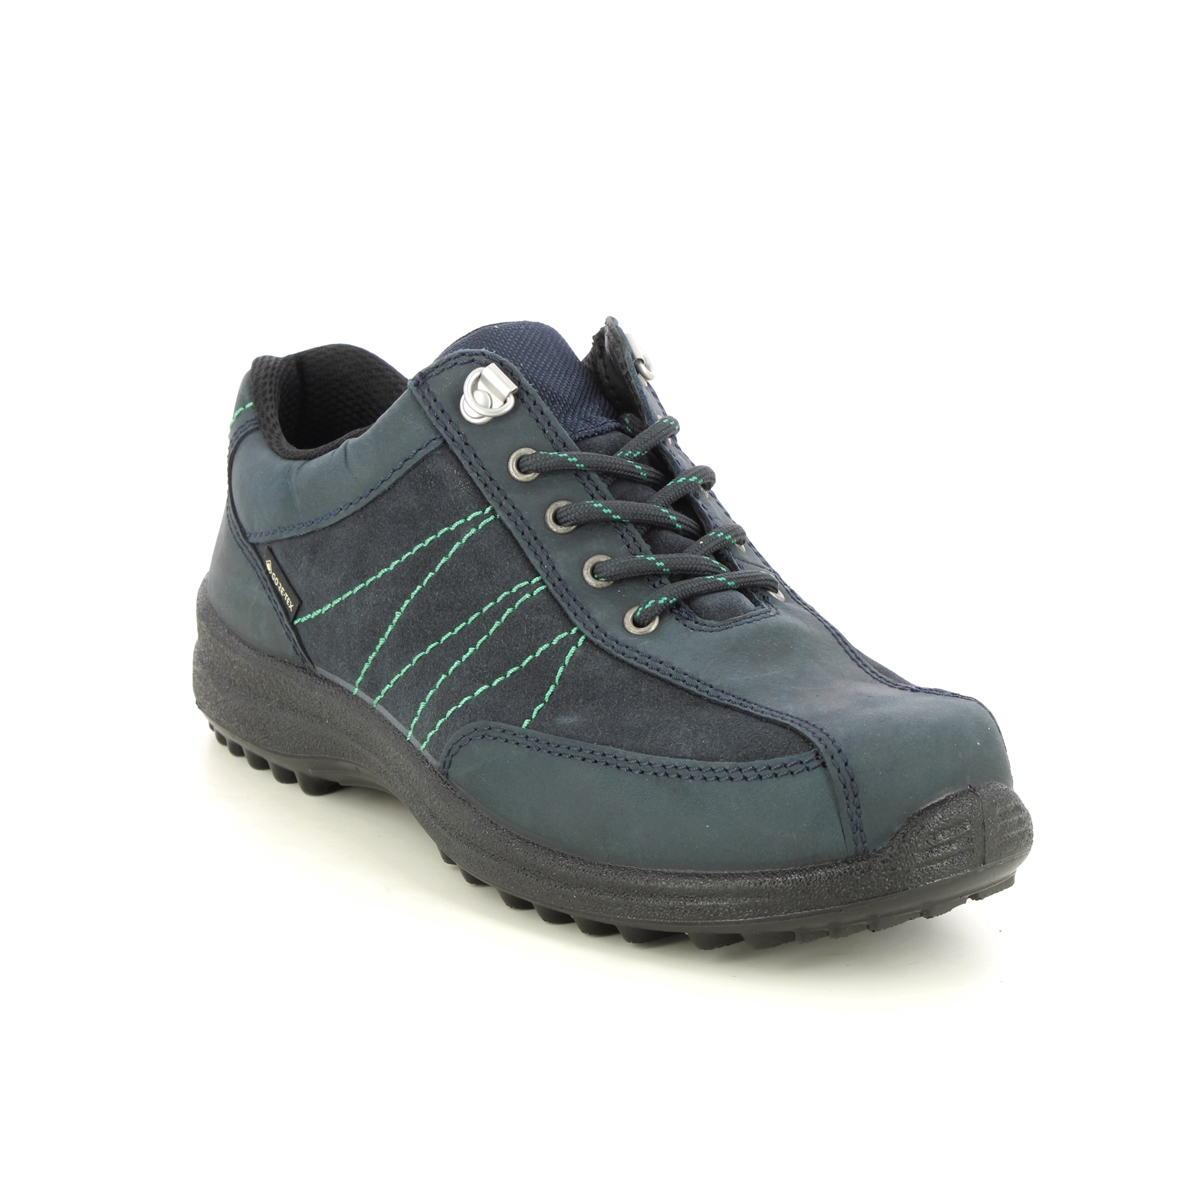 Hotter Mist Gtx Extra Wide Navy leather Womens Walking Shoes 17618-72 in a Plain Leather in Size 5